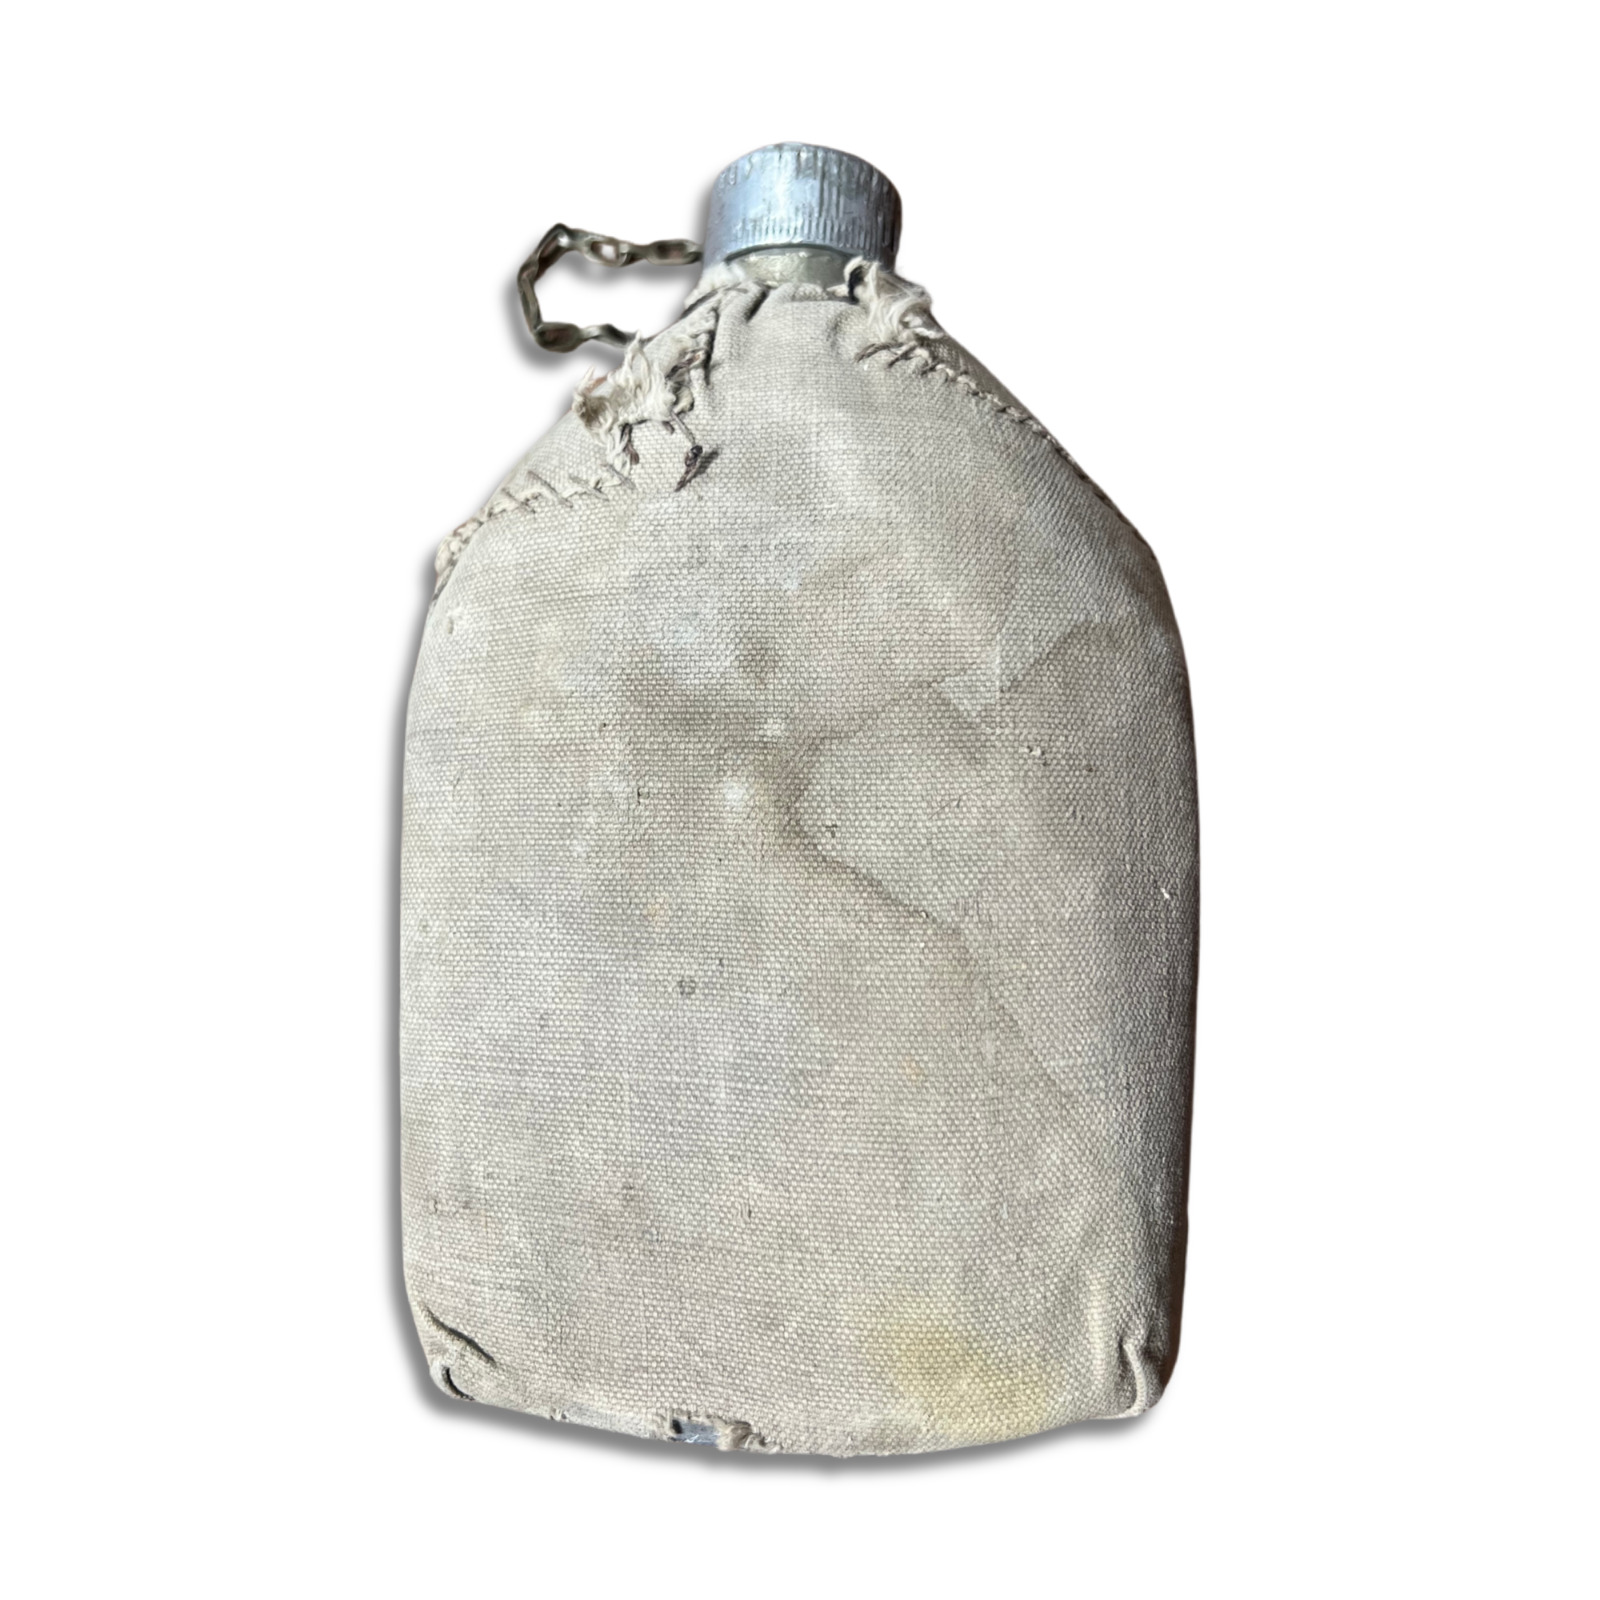 WW1 US Army Aluminum Canteen 1918 with Hand Sewn Cover